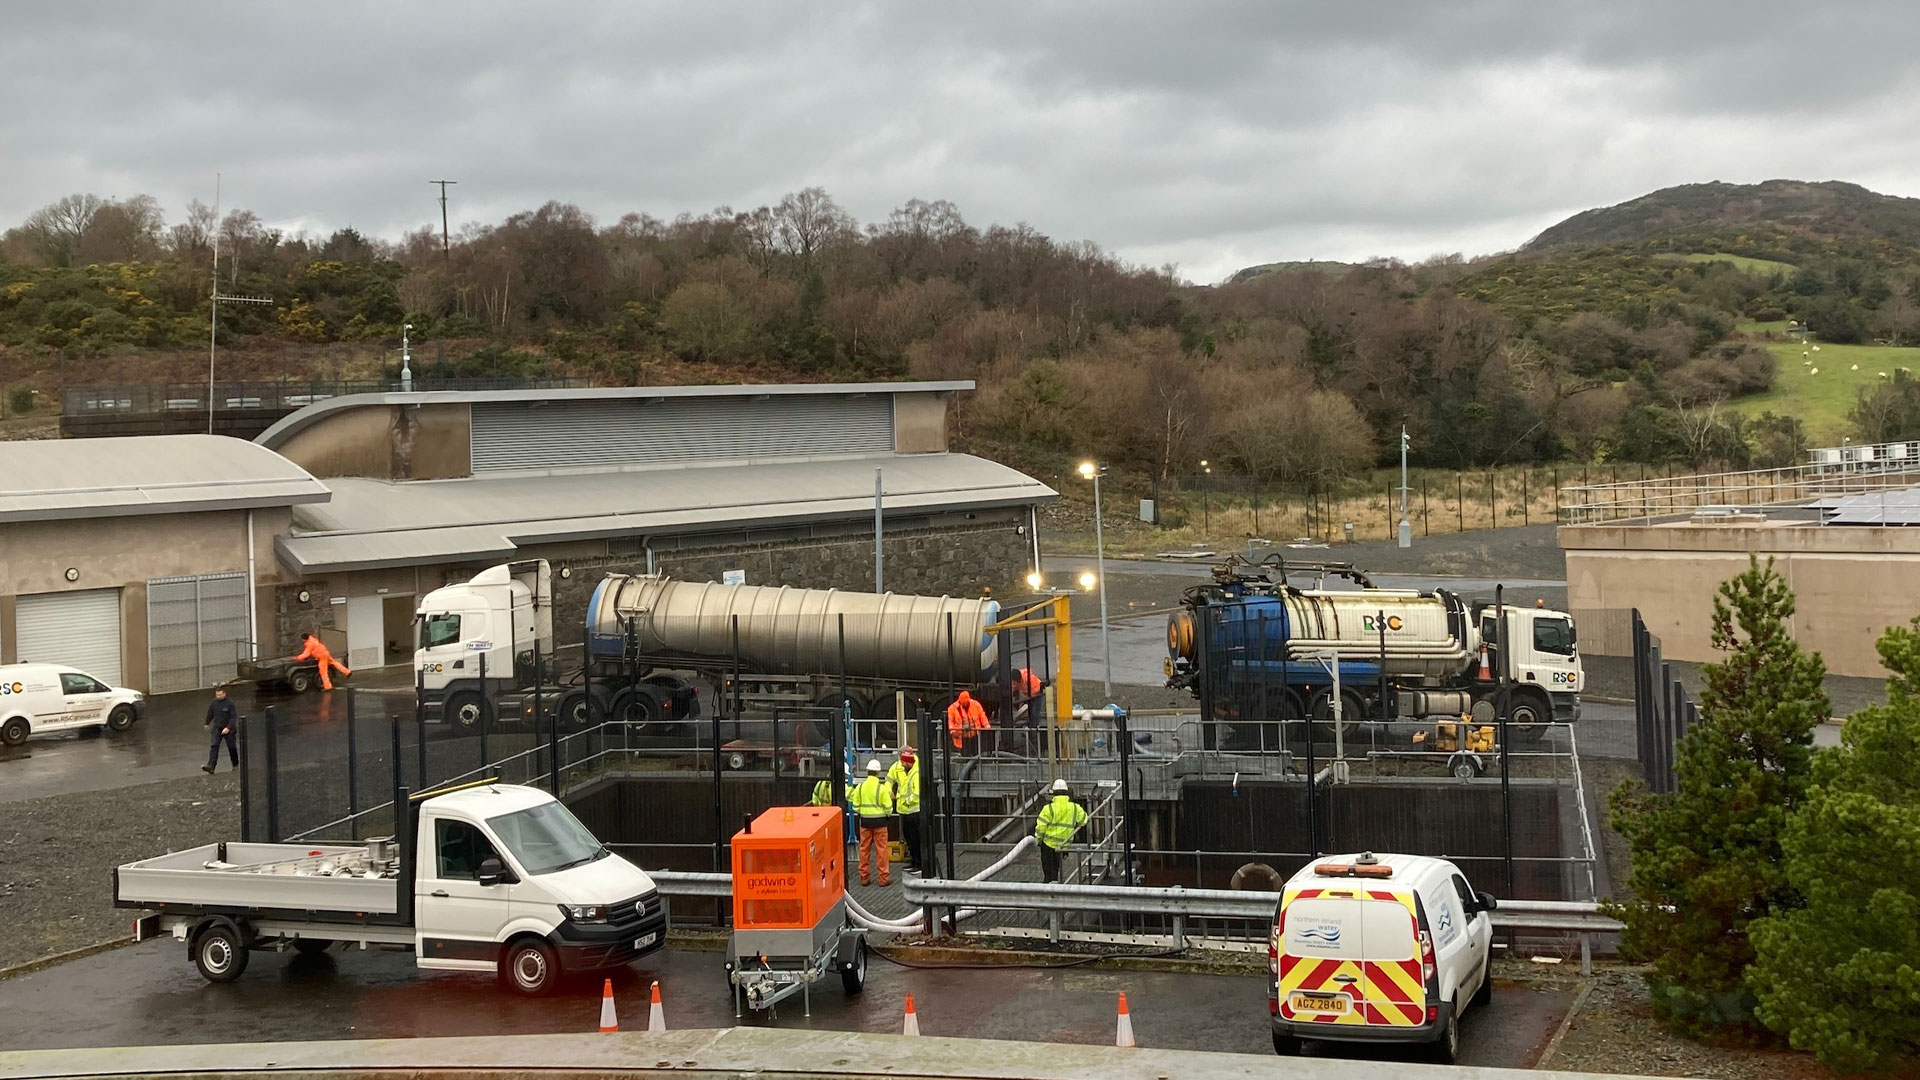 Workers outside a water treatment plant on Drumaroad in Northern Ireland